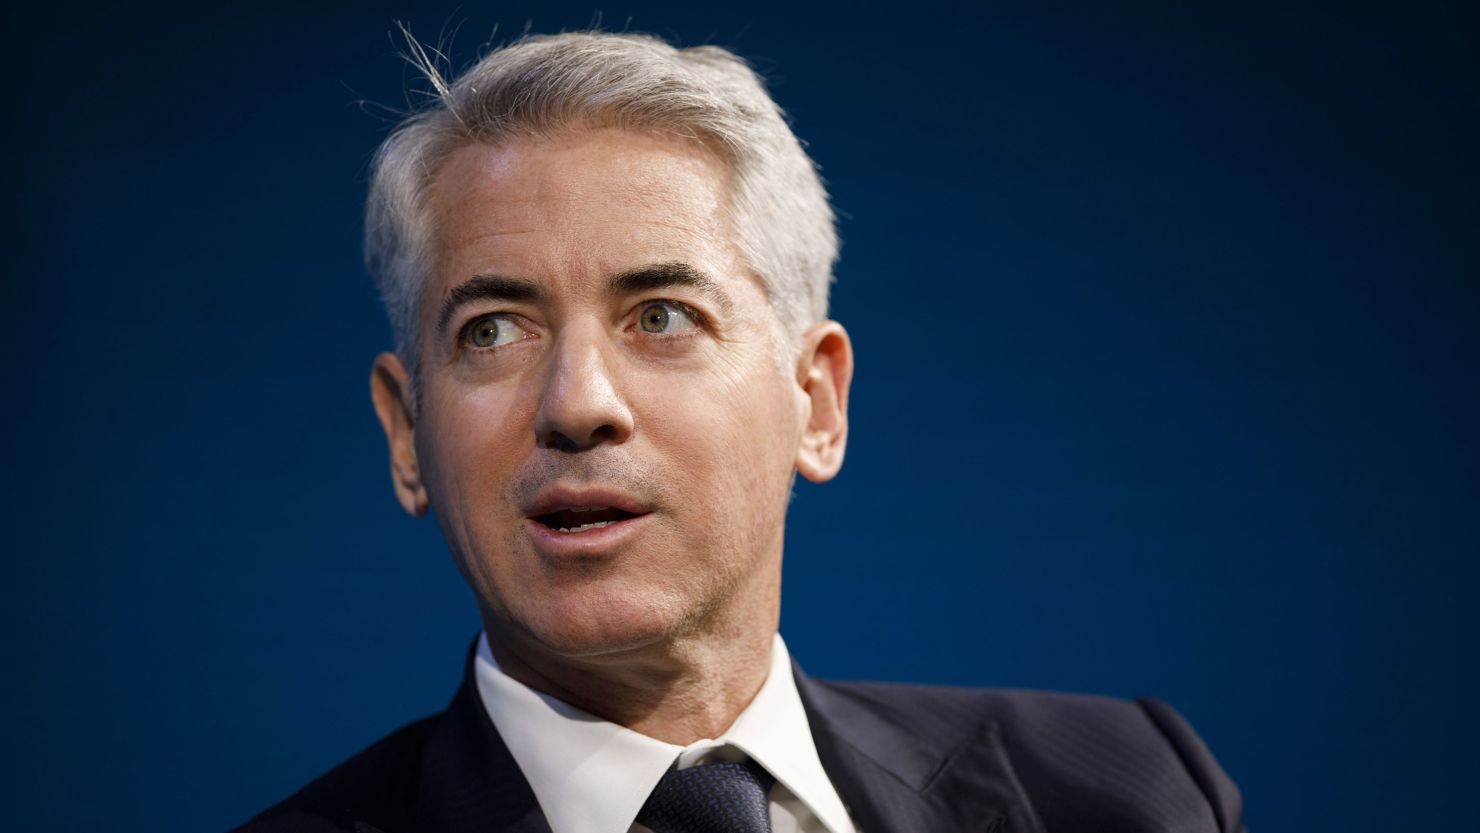 Bill Ackman, chief executive officer of Pershing Square Capital Management LP, speaks during the WSJ D.Live global technology conference in Laguna Beach, California, U.S., on Tuesday, Oct. 17, 2017. WSJ D.Live conference brings together CEOs, founders, investors, and luminaries to discuss the global technology environment and how to move the industry forward. Photographer: Patrick T. Fallon/Bloomberg via Getty Images